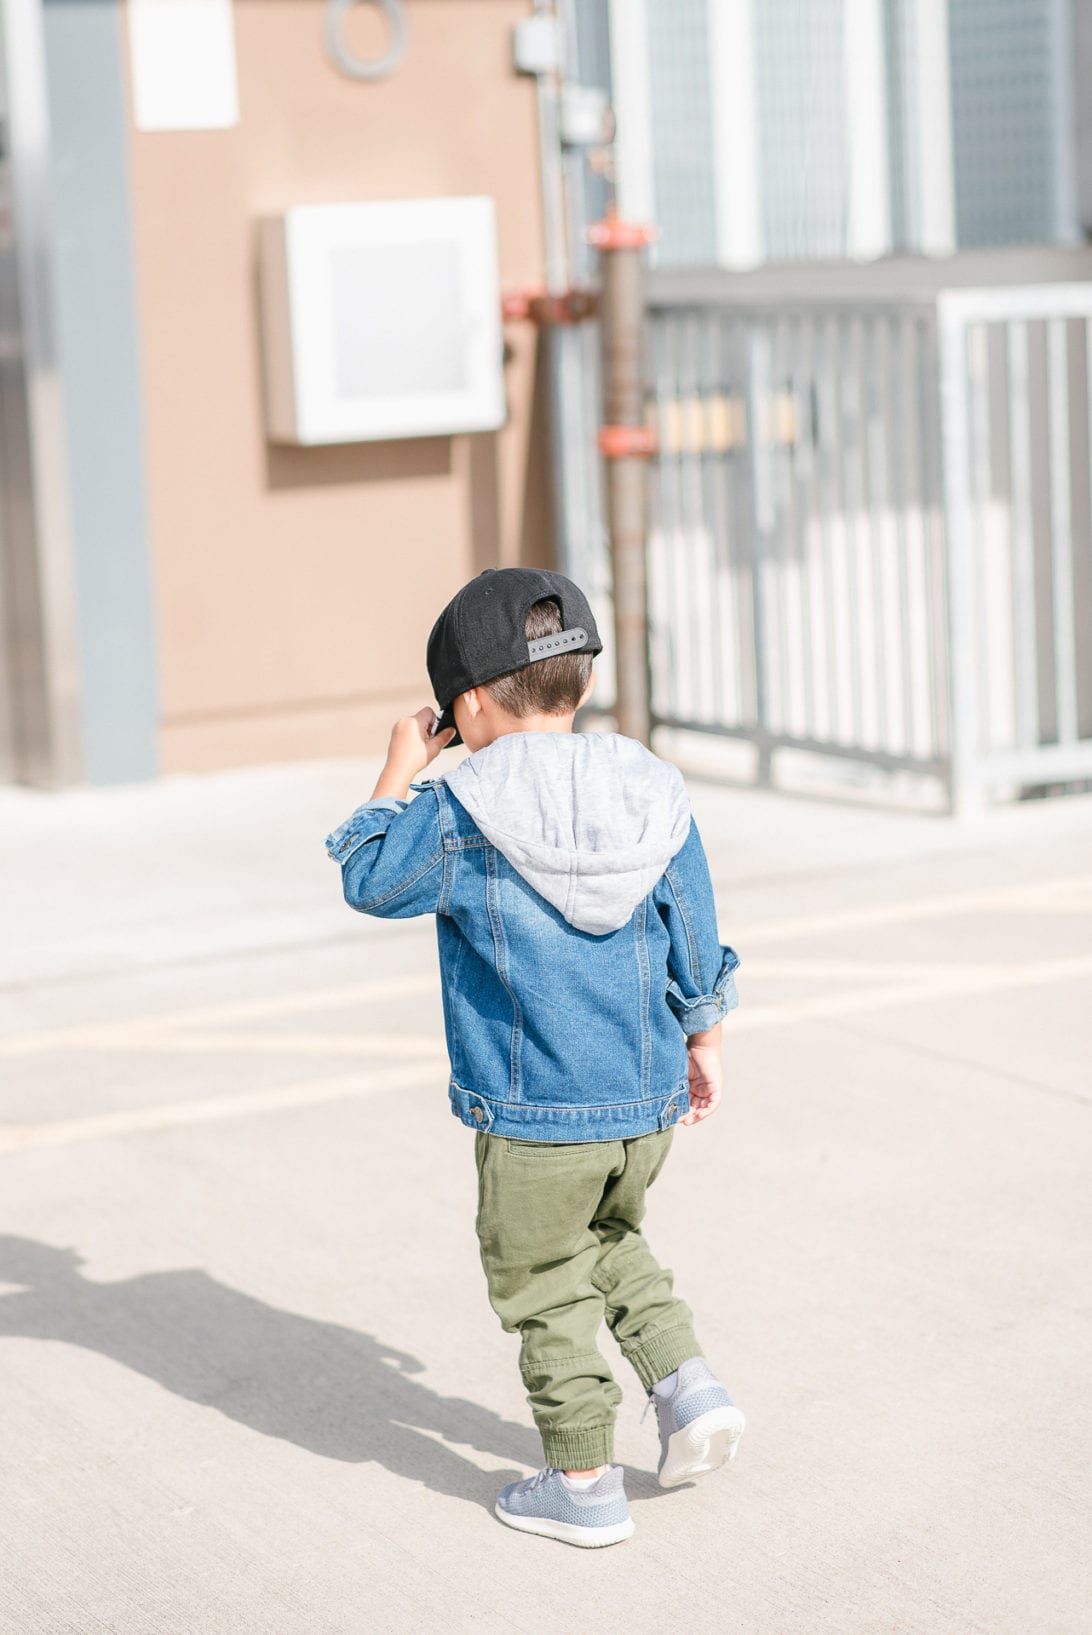 skateboard, toddler fashion, toddler boy style, urban toddler boy fashion, fitness fashion, Lorna Jane Activewear, leopard tights, mommy and me style, mommy and me fashion, #boymom, #houstonblogger, street style, fearless, comfort zone, face your fears